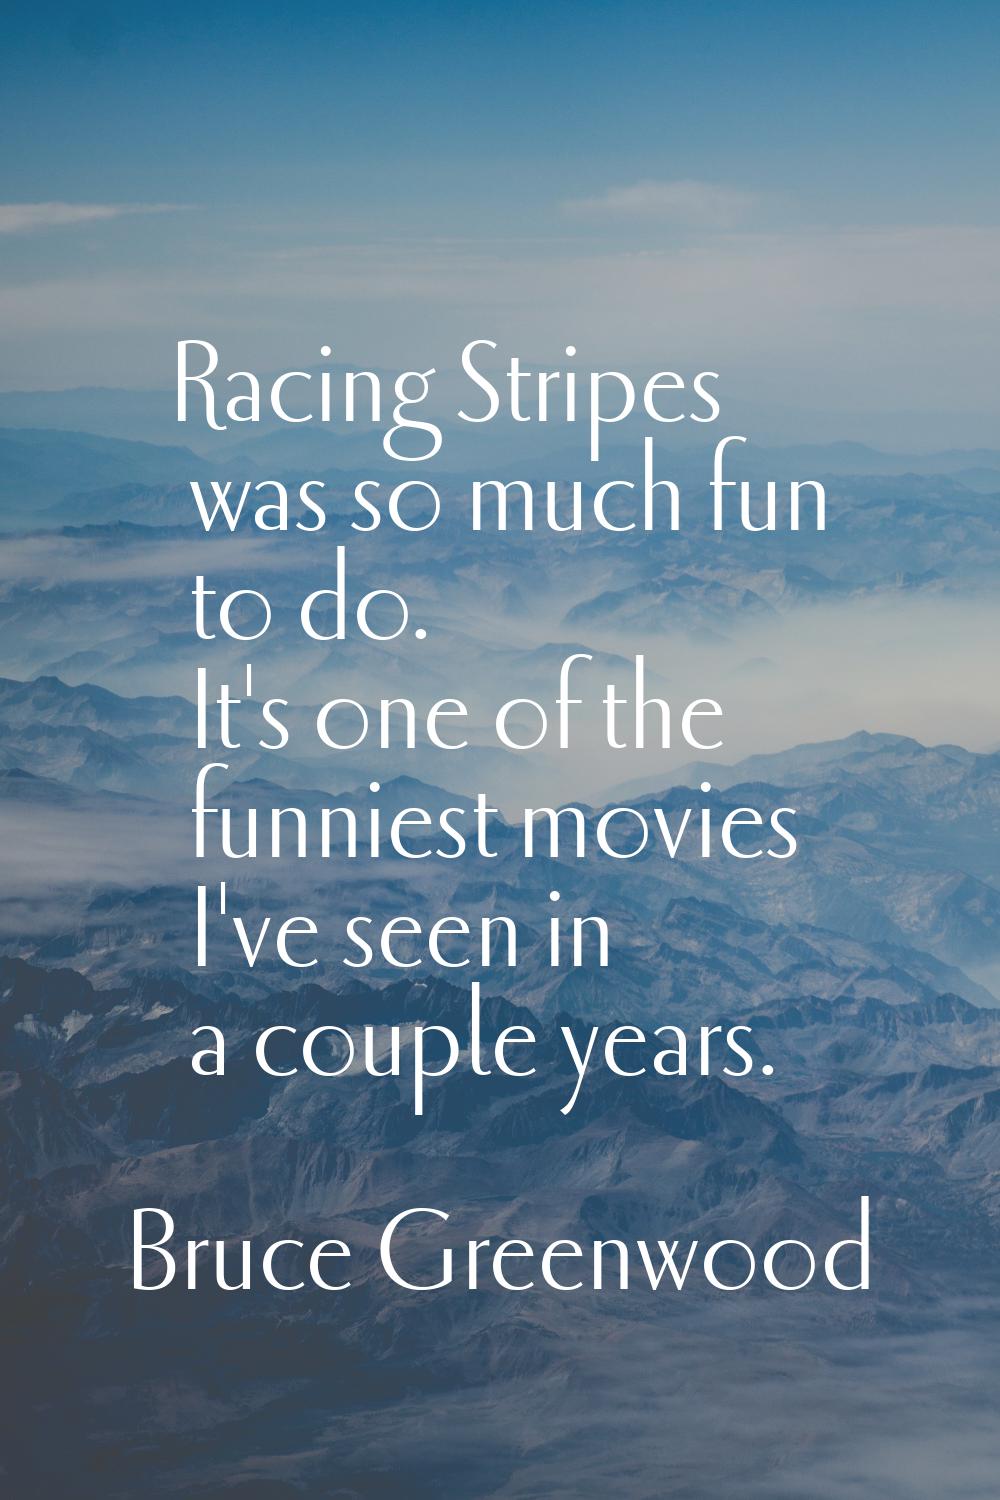 Racing Stripes was so much fun to do. It's one of the funniest movies I've seen in a couple years.